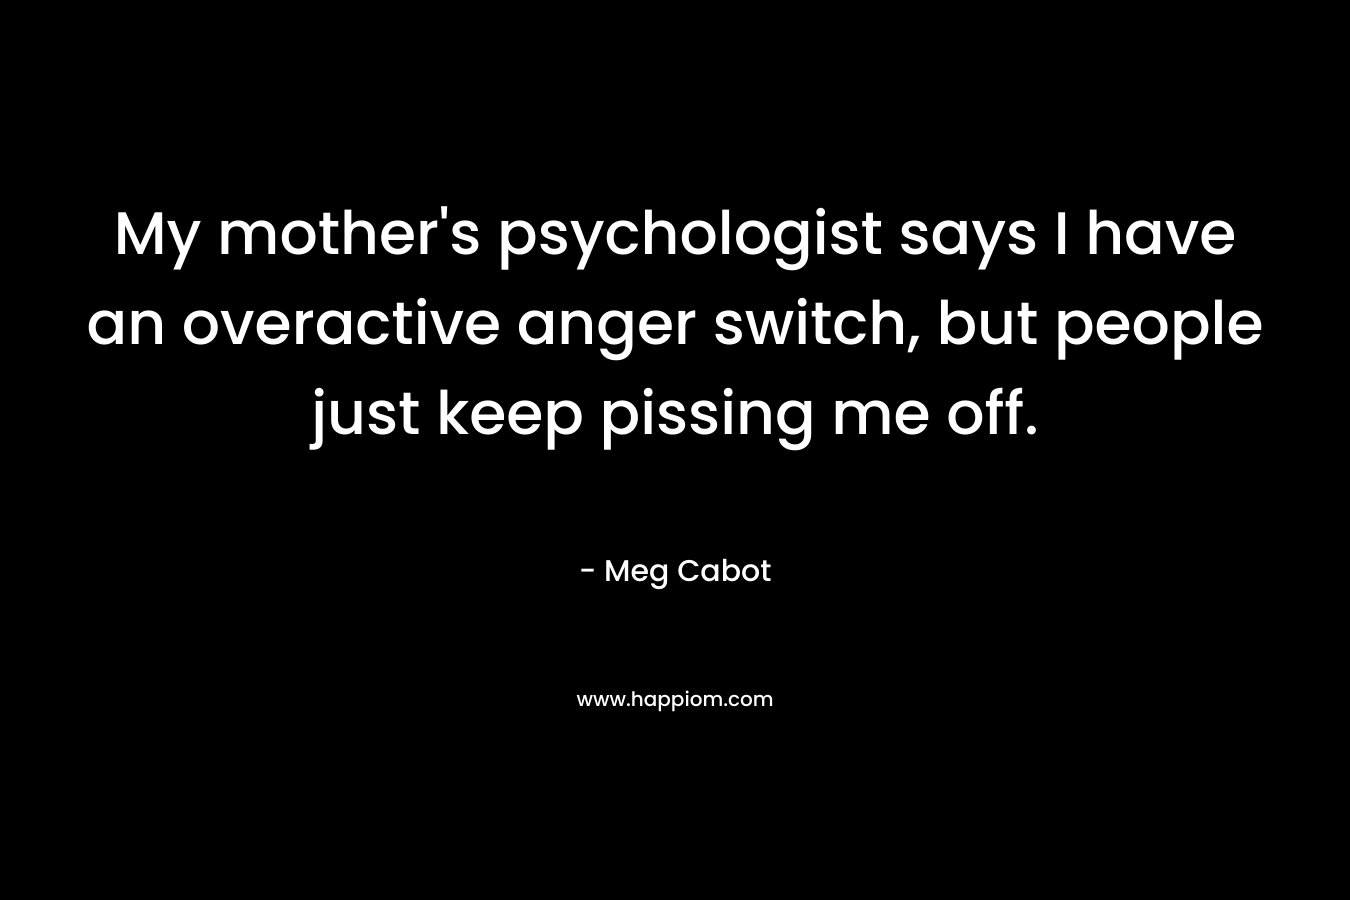 My mother's psychologist says I have an overactive anger switch, but people just keep pissing me off.